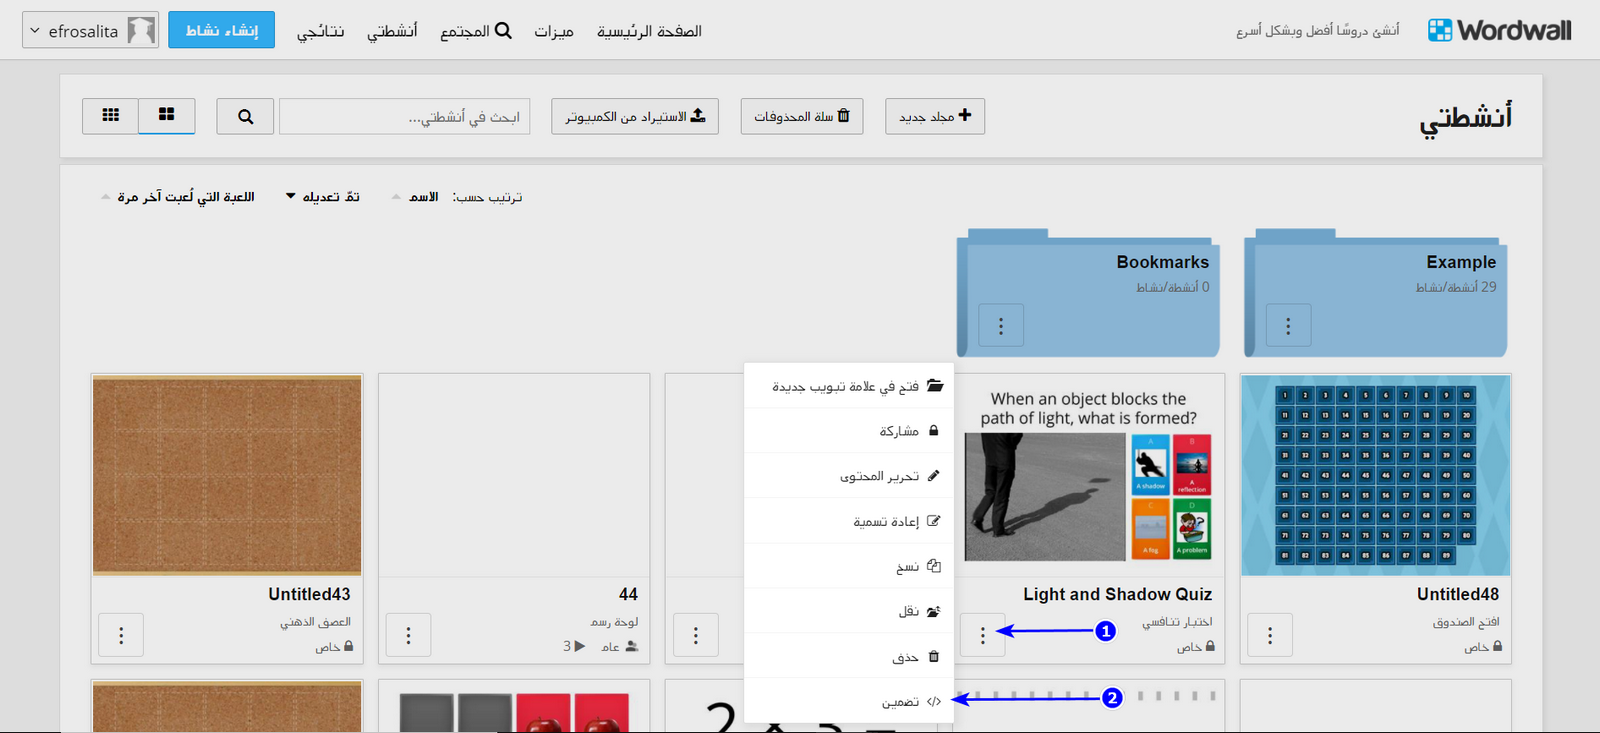 How_do_I_embed_a_Wordwall_resource_on_another_website_-_Arabic_1.png